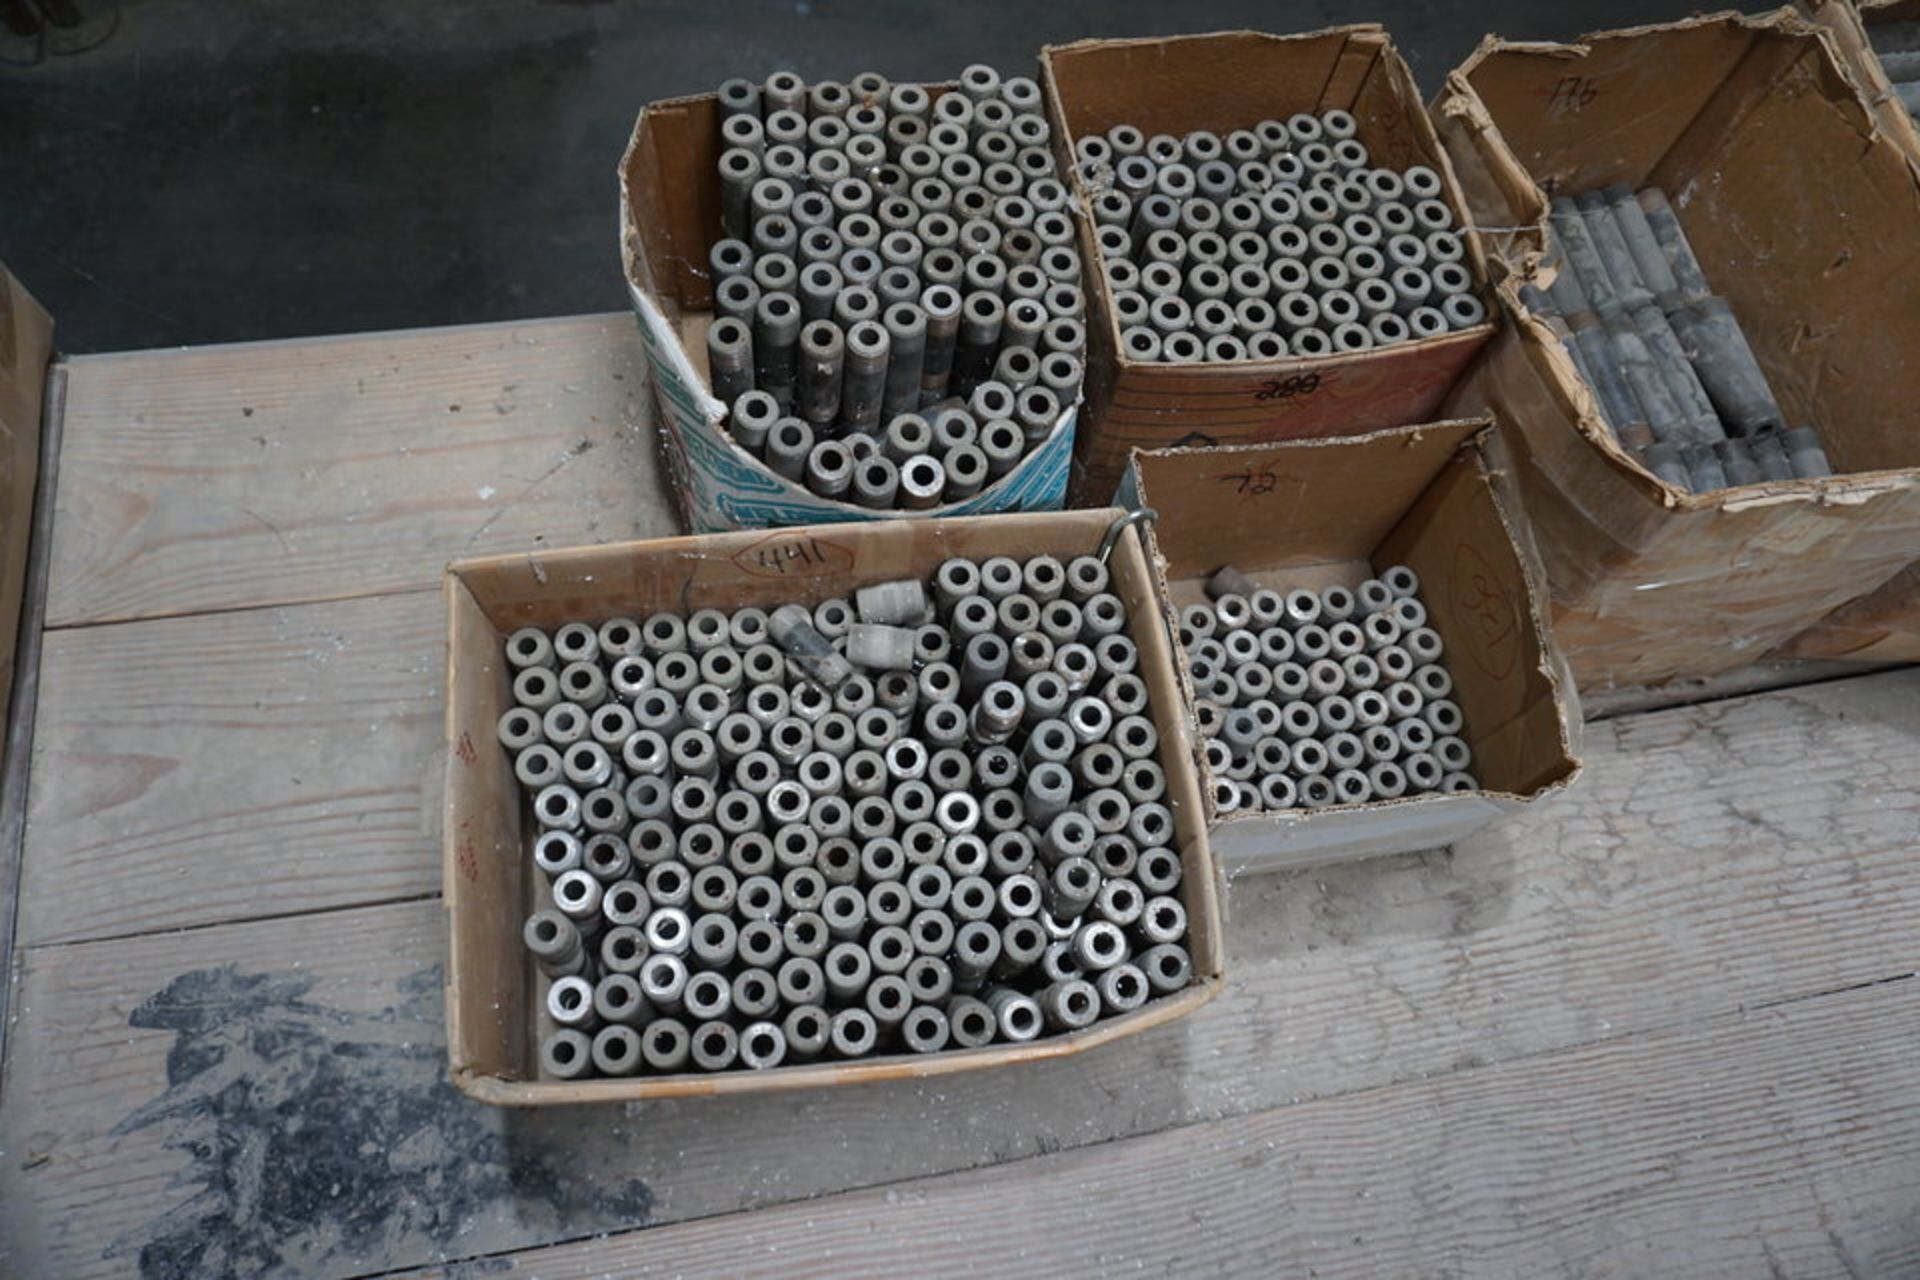 CONT OF TOP OF SHELVES: ASSORT SIZE PIPE NIPPLES, RANGE 1/8"X1" TO 2 1/2"X10" APPROX 3,000 PCS - Image 20 of 34